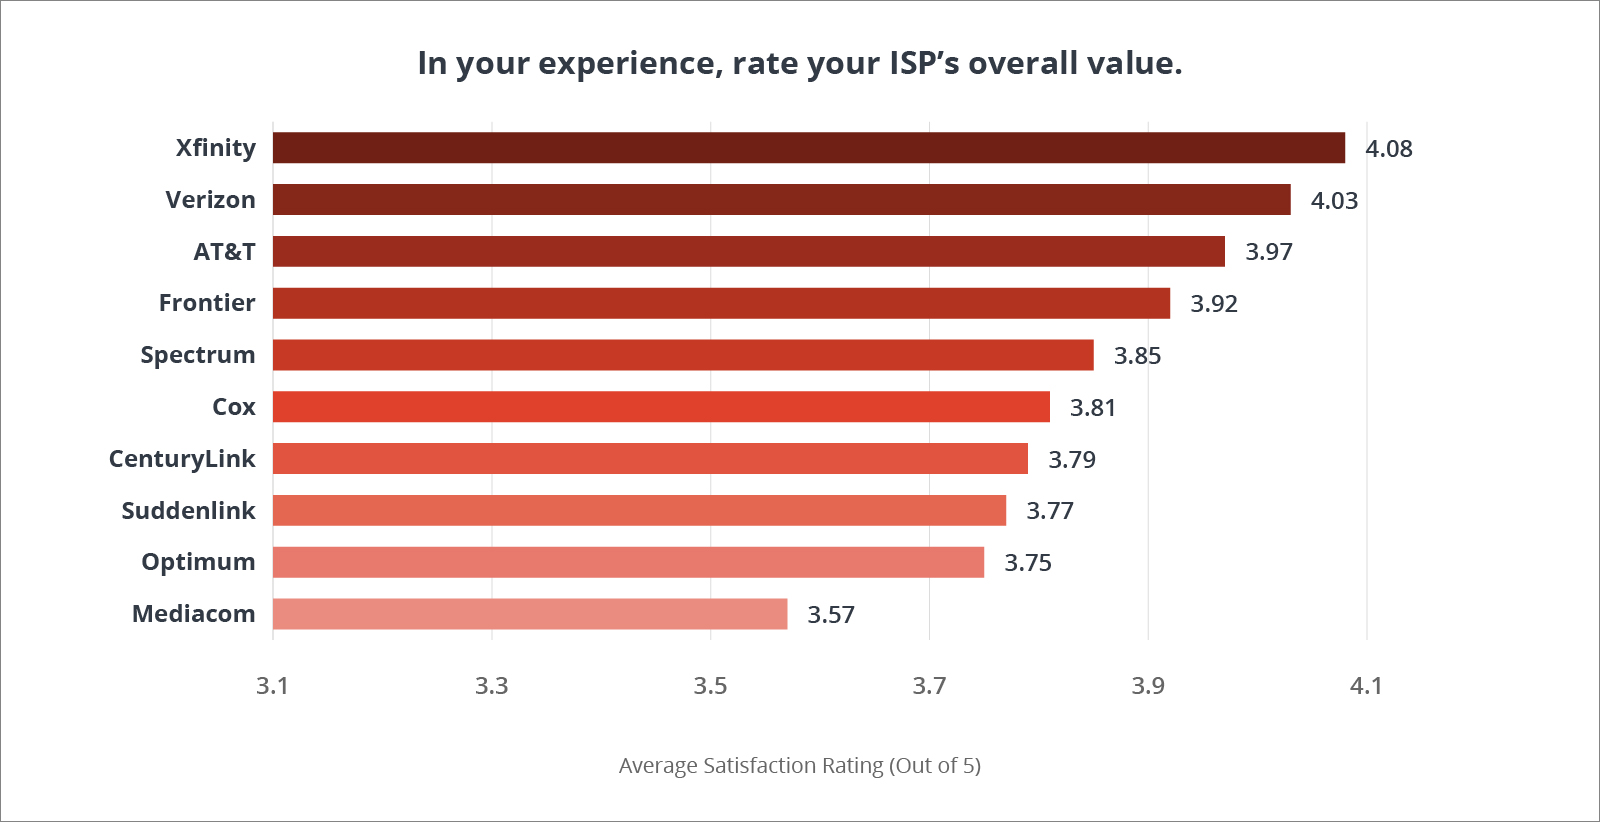 Chart ranking providers based on statement, "In your experience, rate your ISP's overall value."